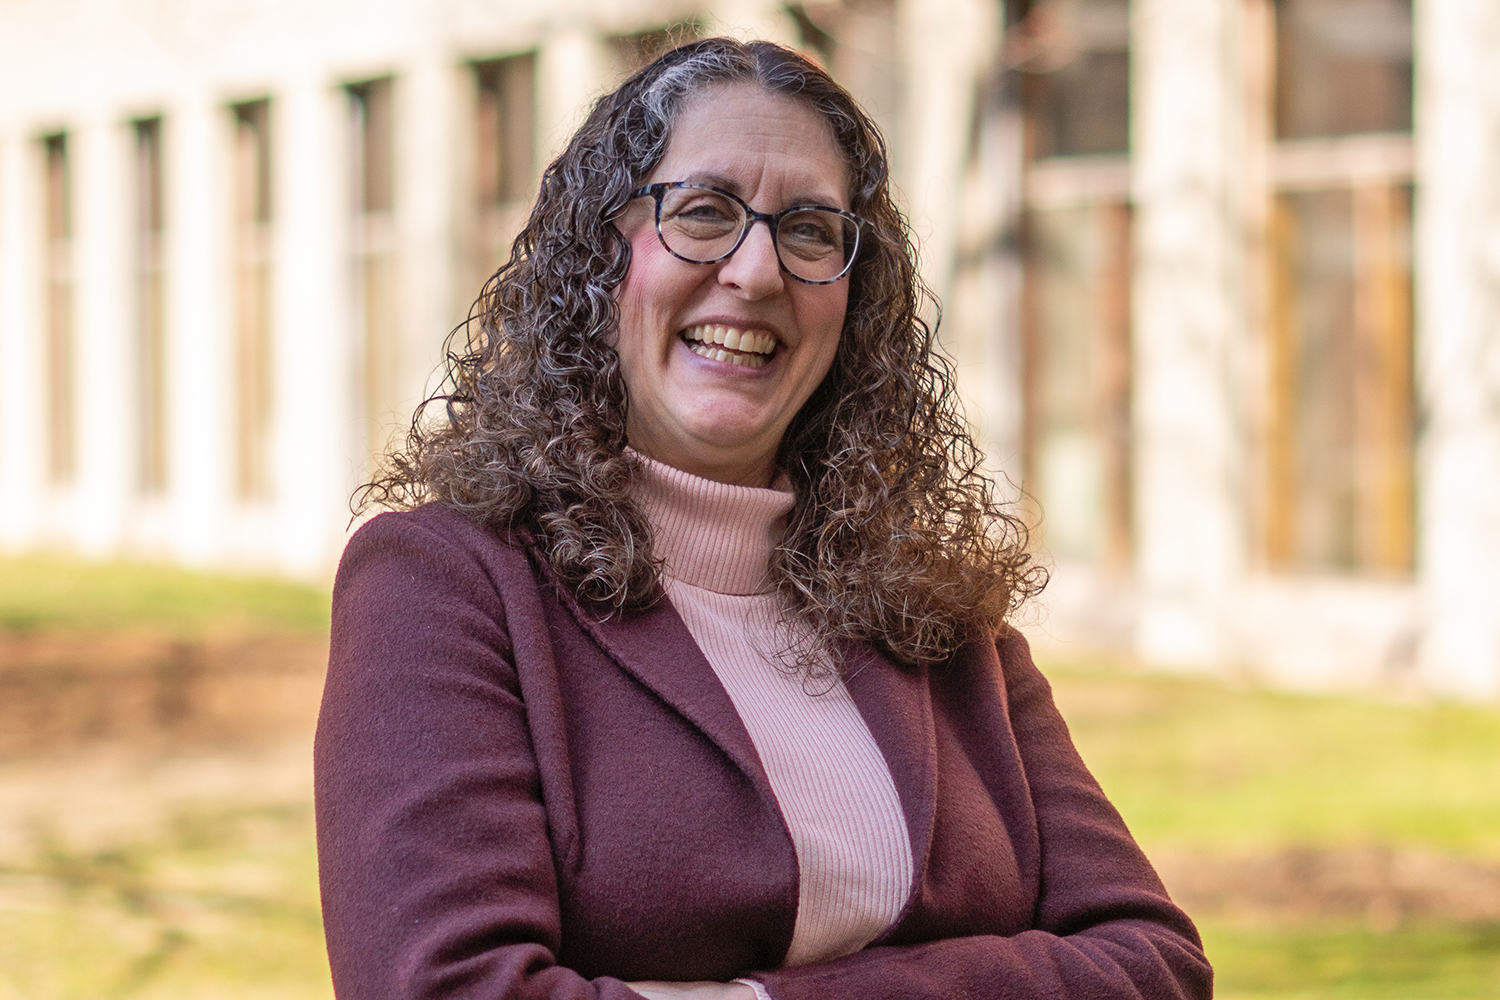 Julie Greenberg recently retired after 37 years at MIT, first as graduate student, then researcher and leader of the Harvard-MIT Program in Health Sciences and Technology academic office.